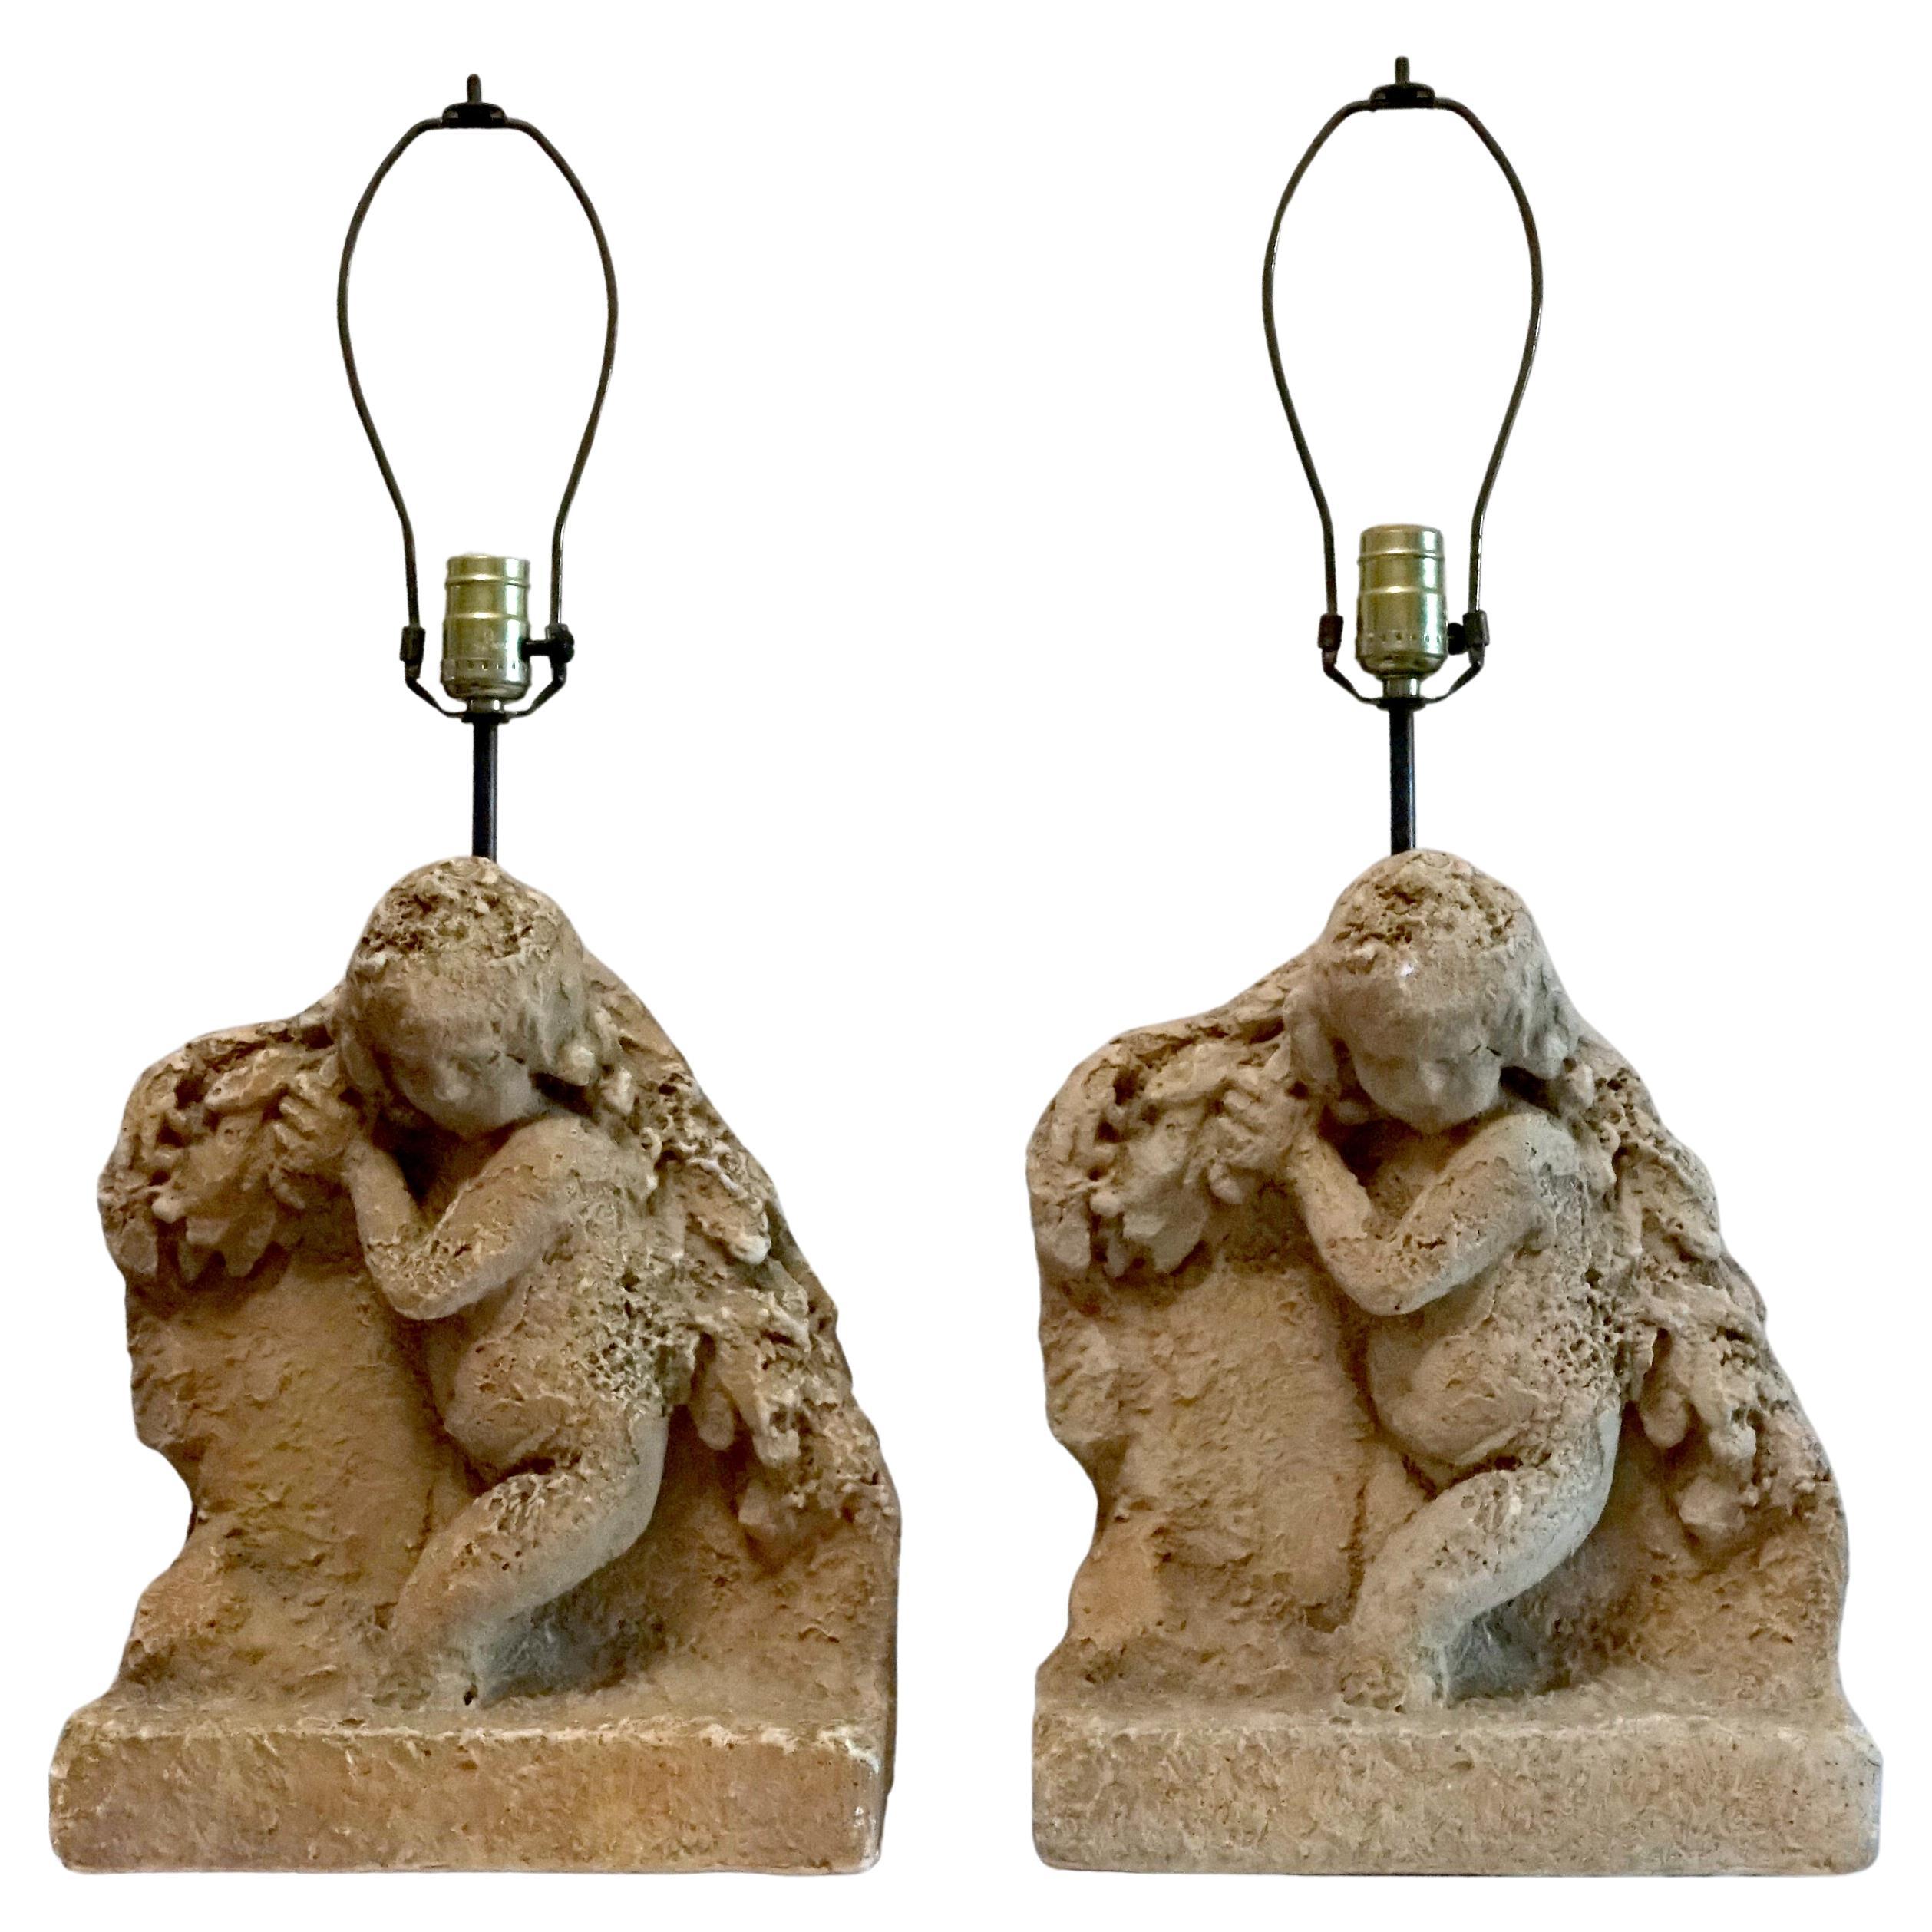 Pair of Cherub Putti Lamps Resin Cast in Beige Stone Effect For Sale